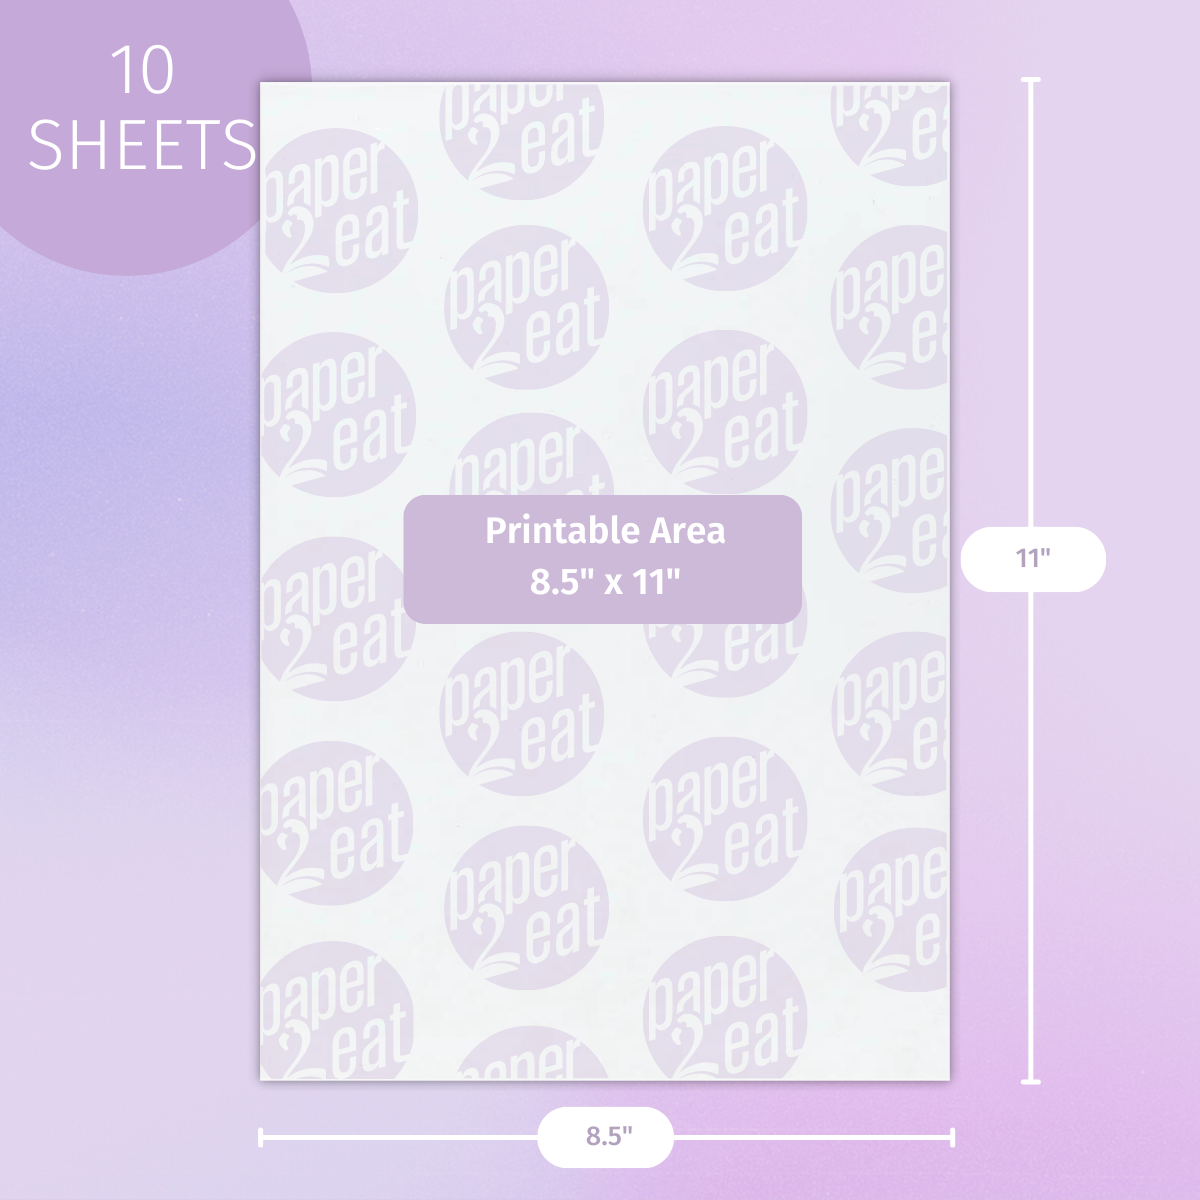 Chocolate Transfer Sheet: Illusion. Pack of 15 Sheets, Each Sheet 16 x  10